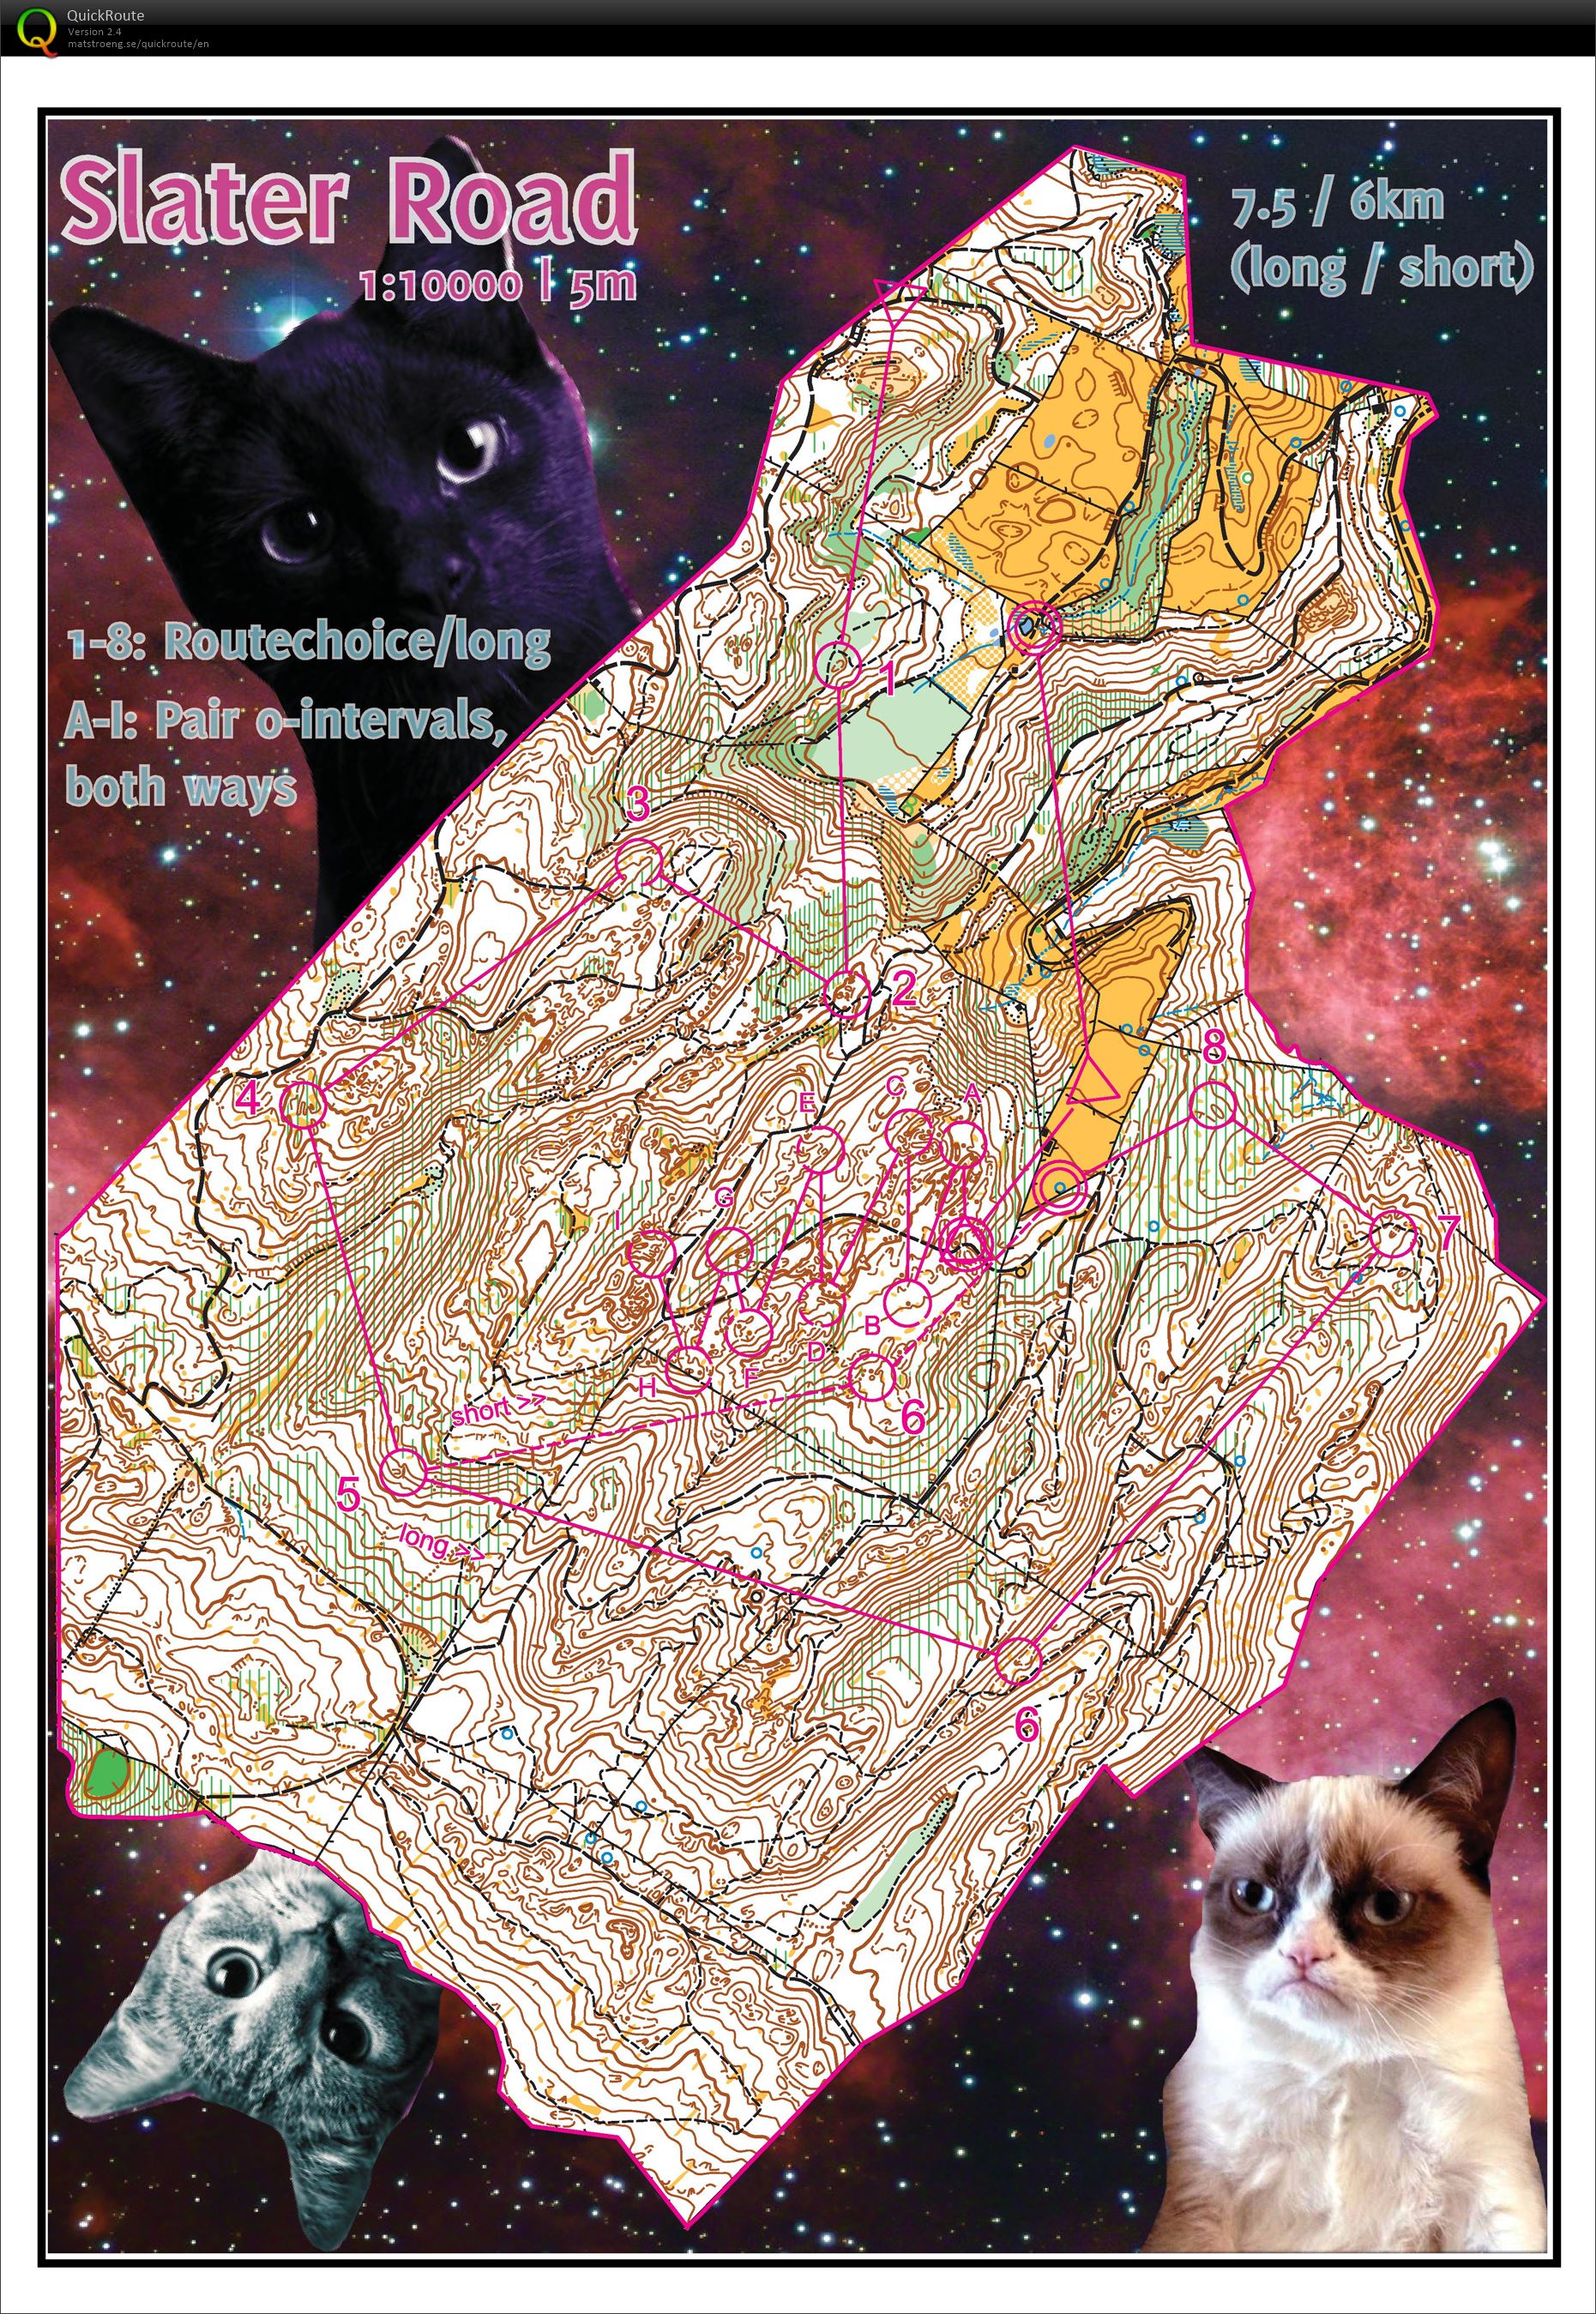 Space Cats - Part 1 (2014-04-26)